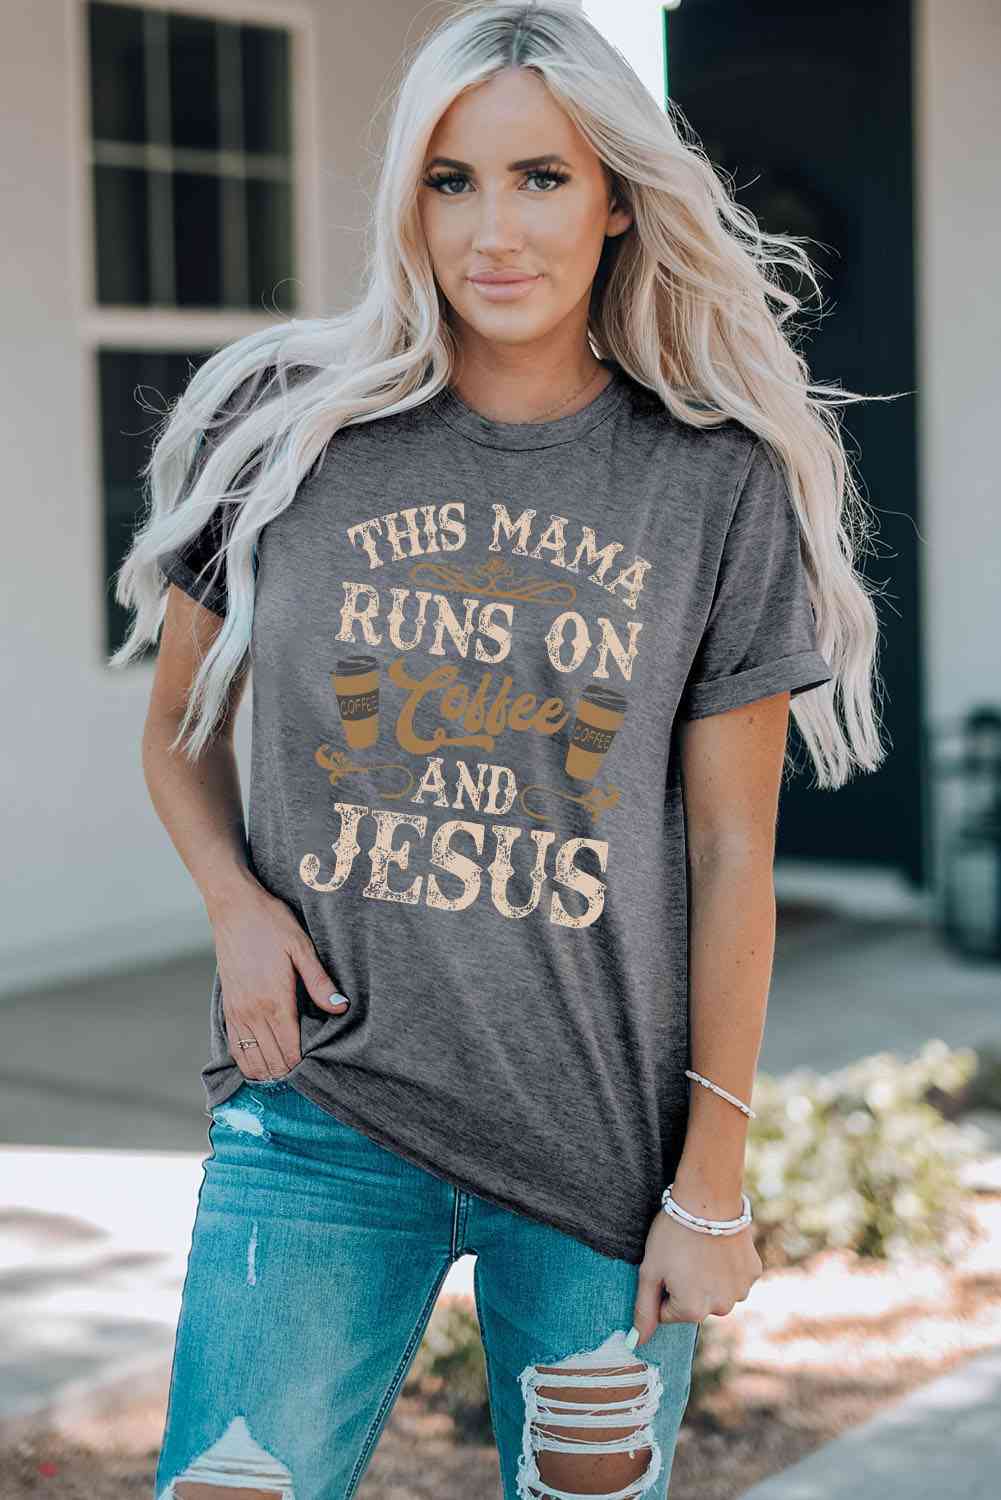 THIS MAMA RUNS ON COFFEE AND JESUS Tee - Fuel Your Day with Faith, Laughter, and ☕